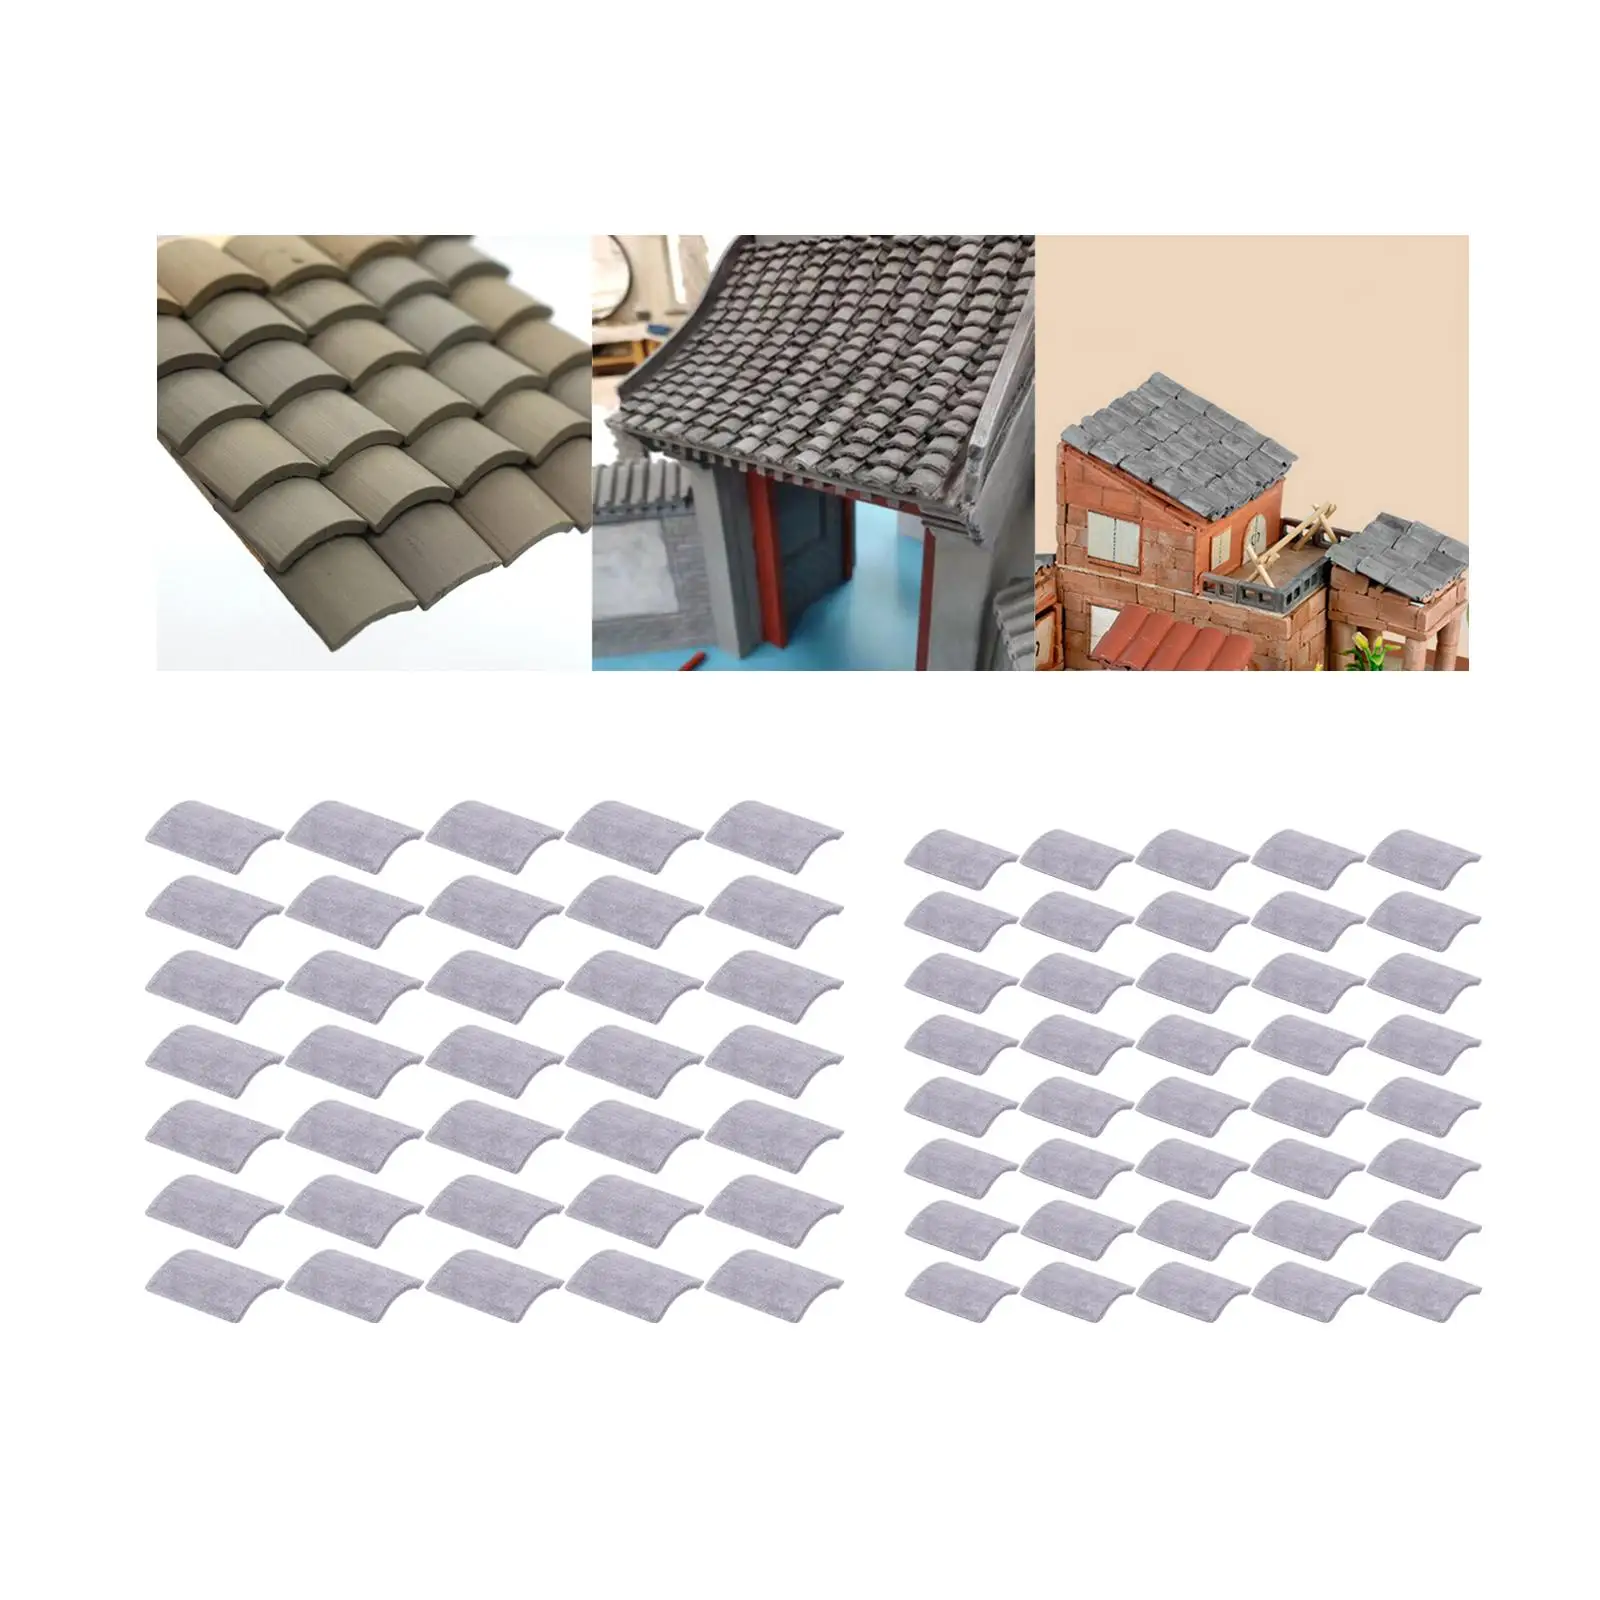 Grey Roof Tiles 1:16 Decor Miniature Tiles Figurine Landscaping Accessories for Dollhouses Life Scene Props Toys DIY Fitments